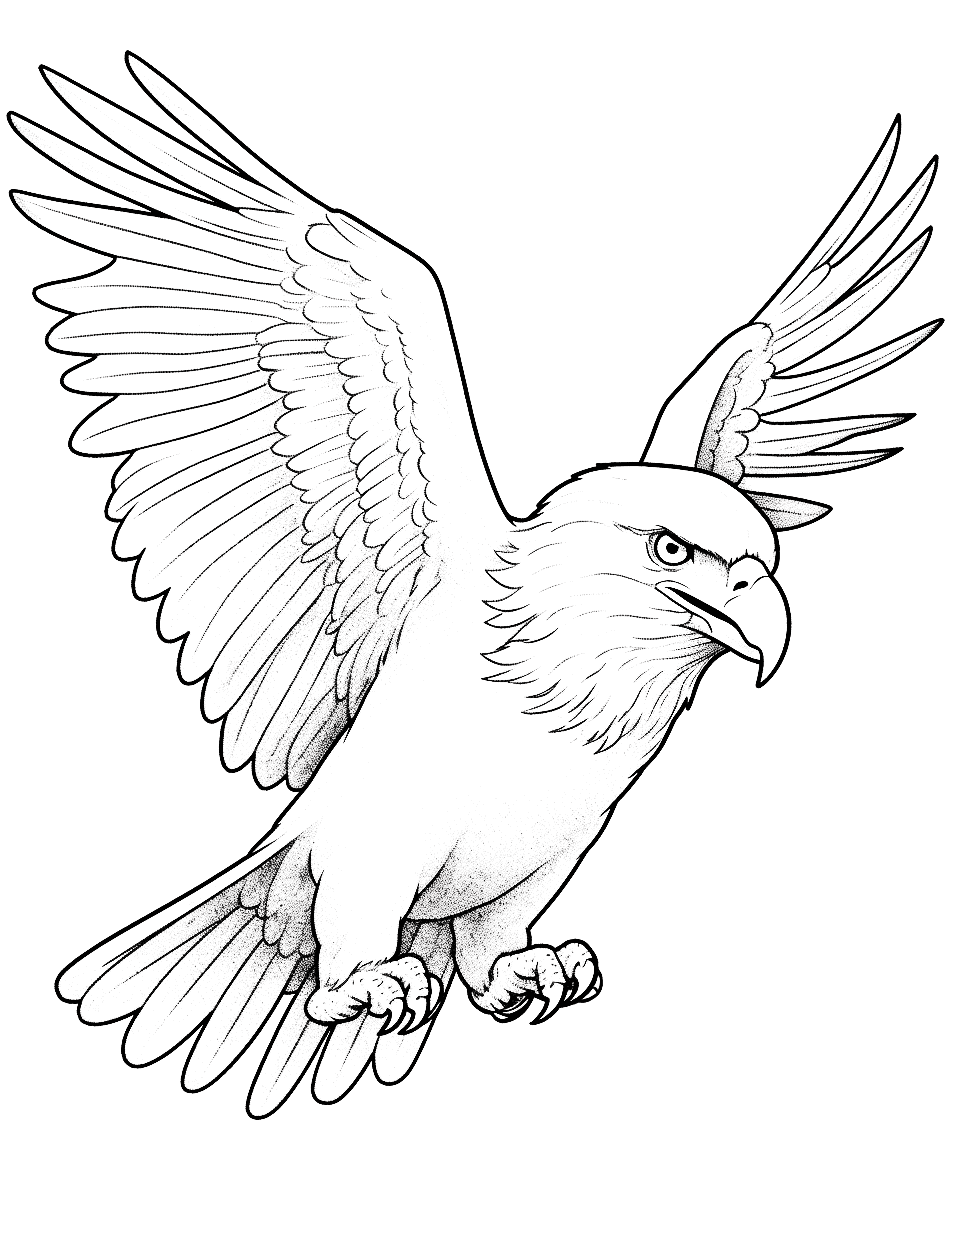 Majestic Bald Eagle Animal Coloring Page - A powerful bald eagle soaring through the sky.